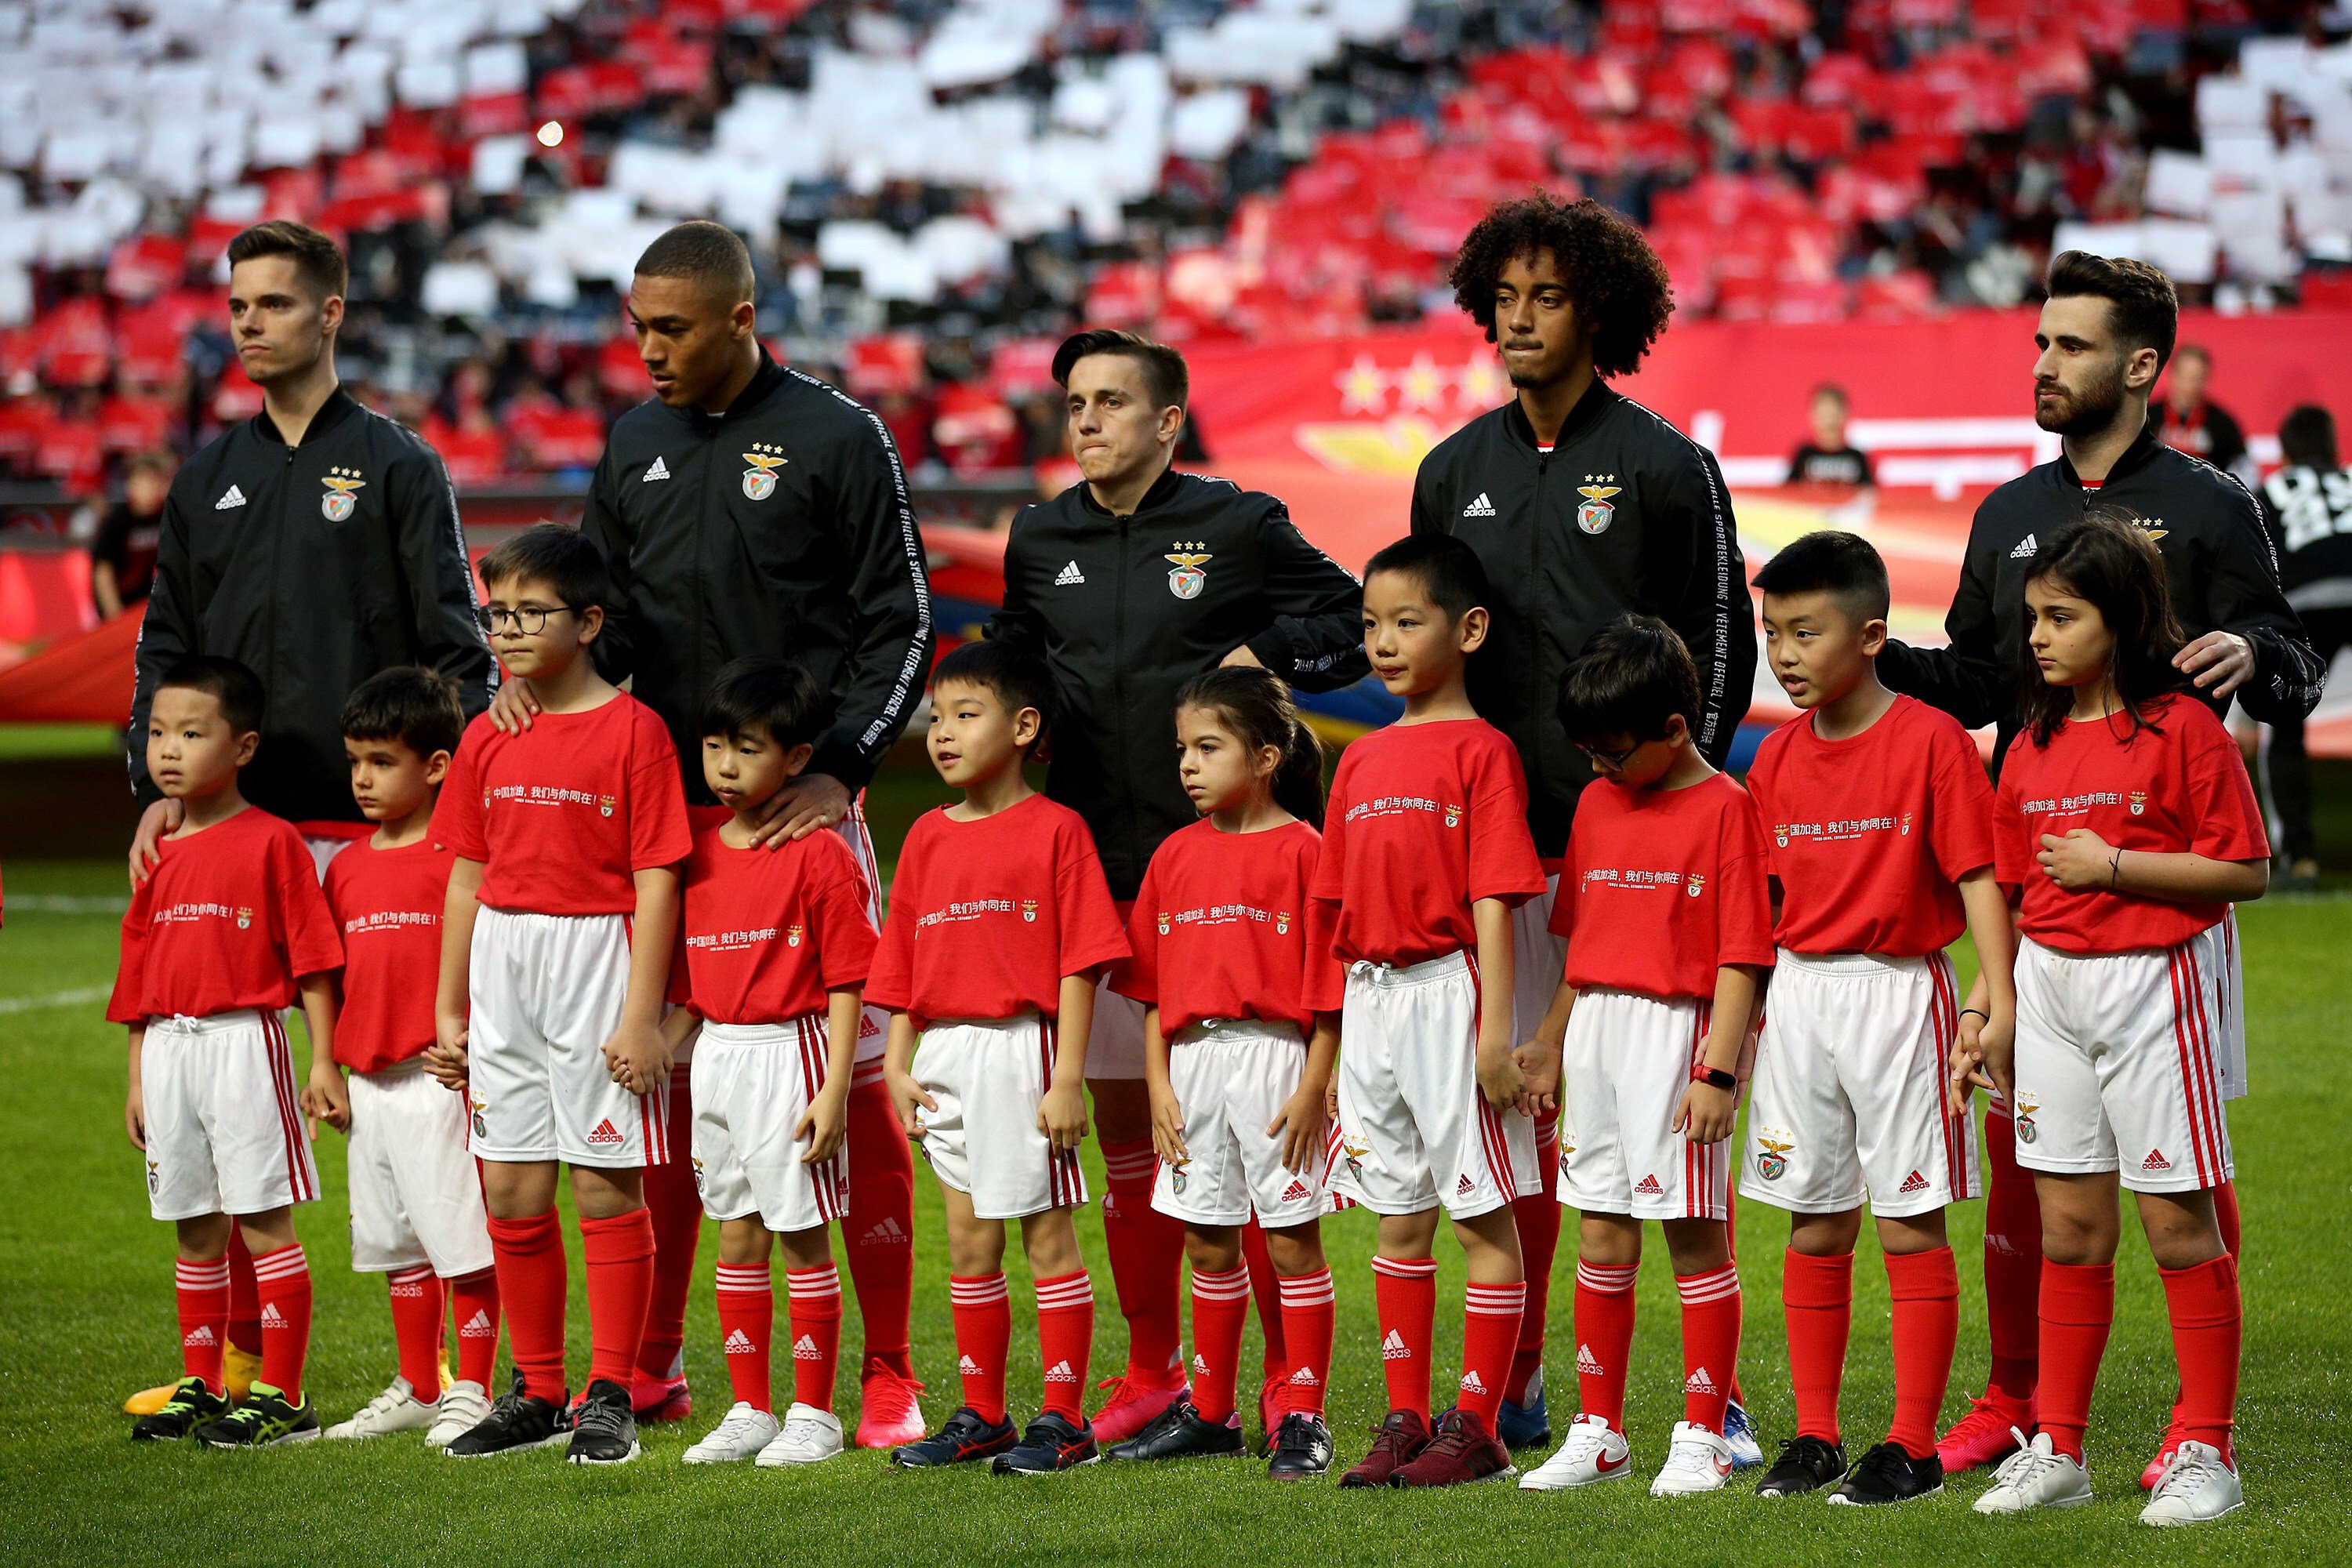 Portuguese professional football club players pose with Chinese children ahead of a game, during a brief ceremony to express solidarity with China’s fight against the Covid-19 pandemic, at the Luz stadium in Lisbon on February 15, 2020. Photo: Xinhua 